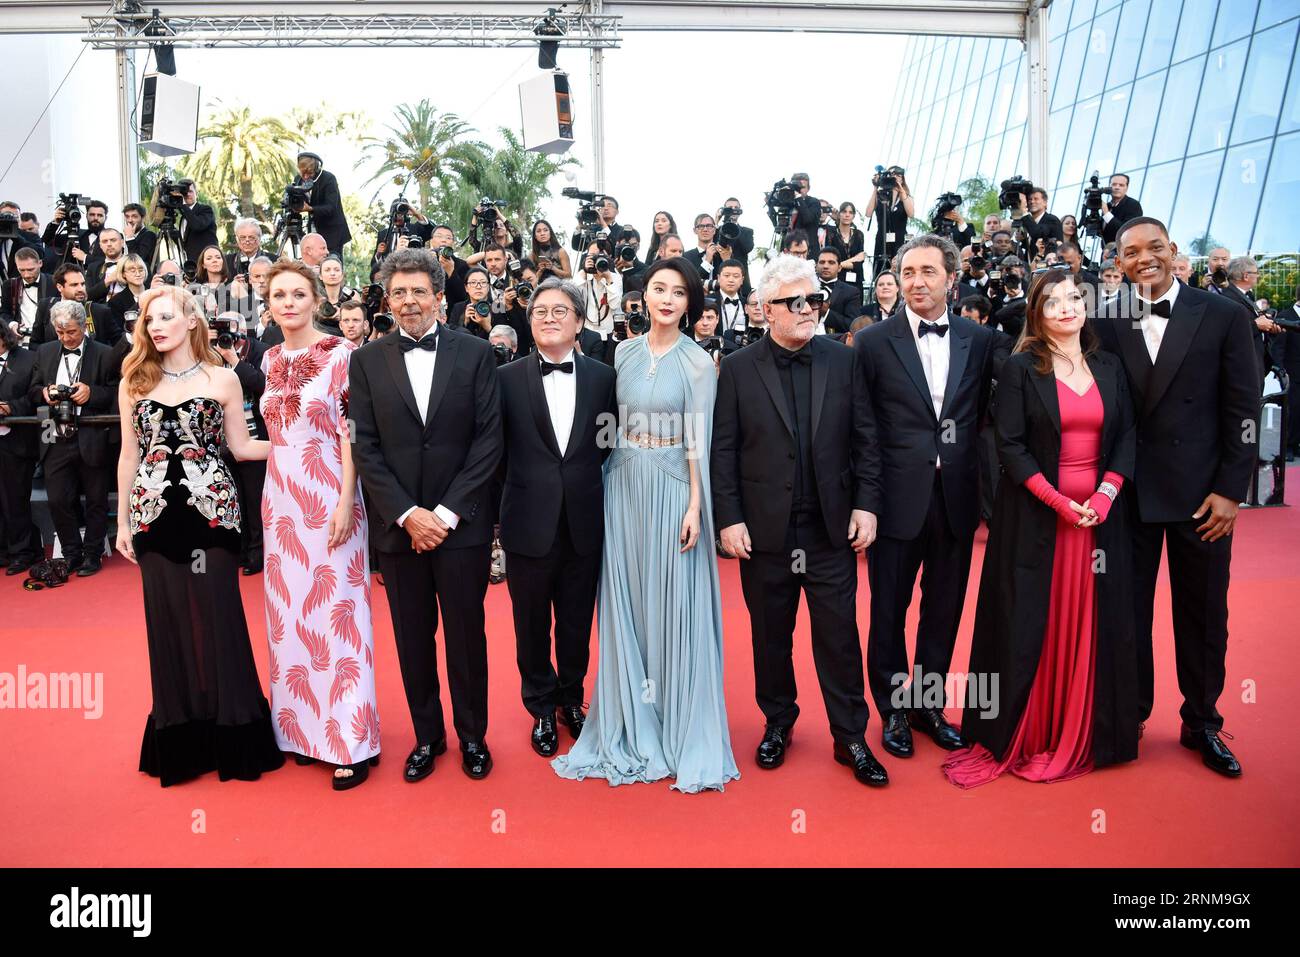 (170518) -- CANNES (FRANCE), May 18, 2017 -- Jury members of the 70th Cannes International Film Festival Will Smith, Agnes Jaoui, Paolo Sorrentino, Pedro Almodovar, Fan Bingbing, Park Chan-wook, Gabriel Yared, Marin Ade and Jessica Chastain (R-L) pose for photos on the red carpet before the opening of the 70th Cannes International Film Festival in Cannes, France, on May 17, 2017. The 70th Cannes International Film Festival is held from May 17 to May 28. )(bxf) FRANCE-CANNES-70TH CANNES INTERNATIONAL FILM FESTIVAL-OPENING ChenxYichen PUBLICATIONxNOTxINxCHN   Cannes France May 18 2017 Jury Membe Stock Photo